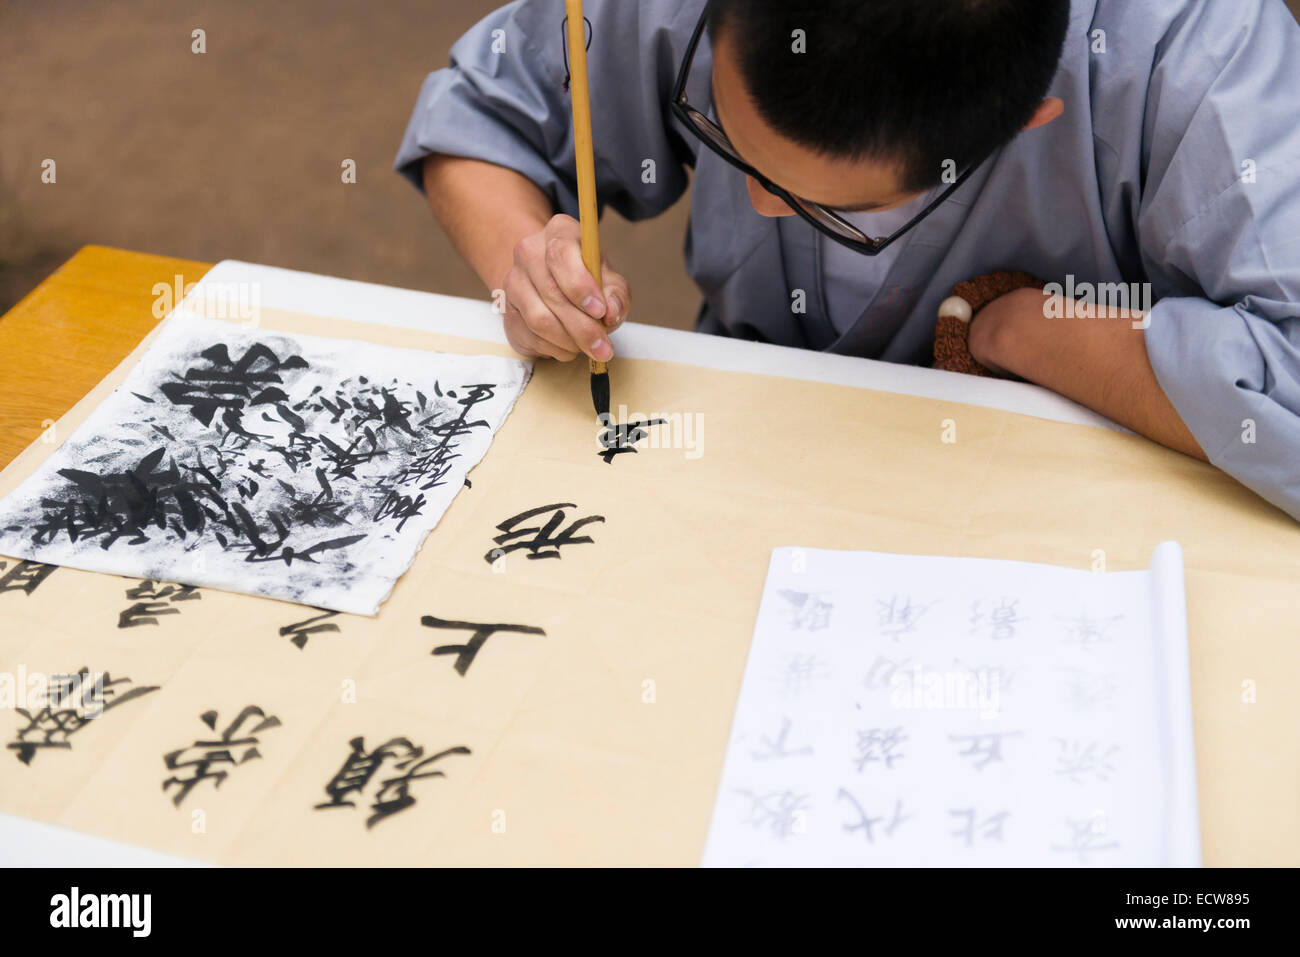 License available at MaximImages.com - Student of a Shaolin martial arts school practices Chinese calligraphy in DengFeng, Henan, China 2014 Stock Photo